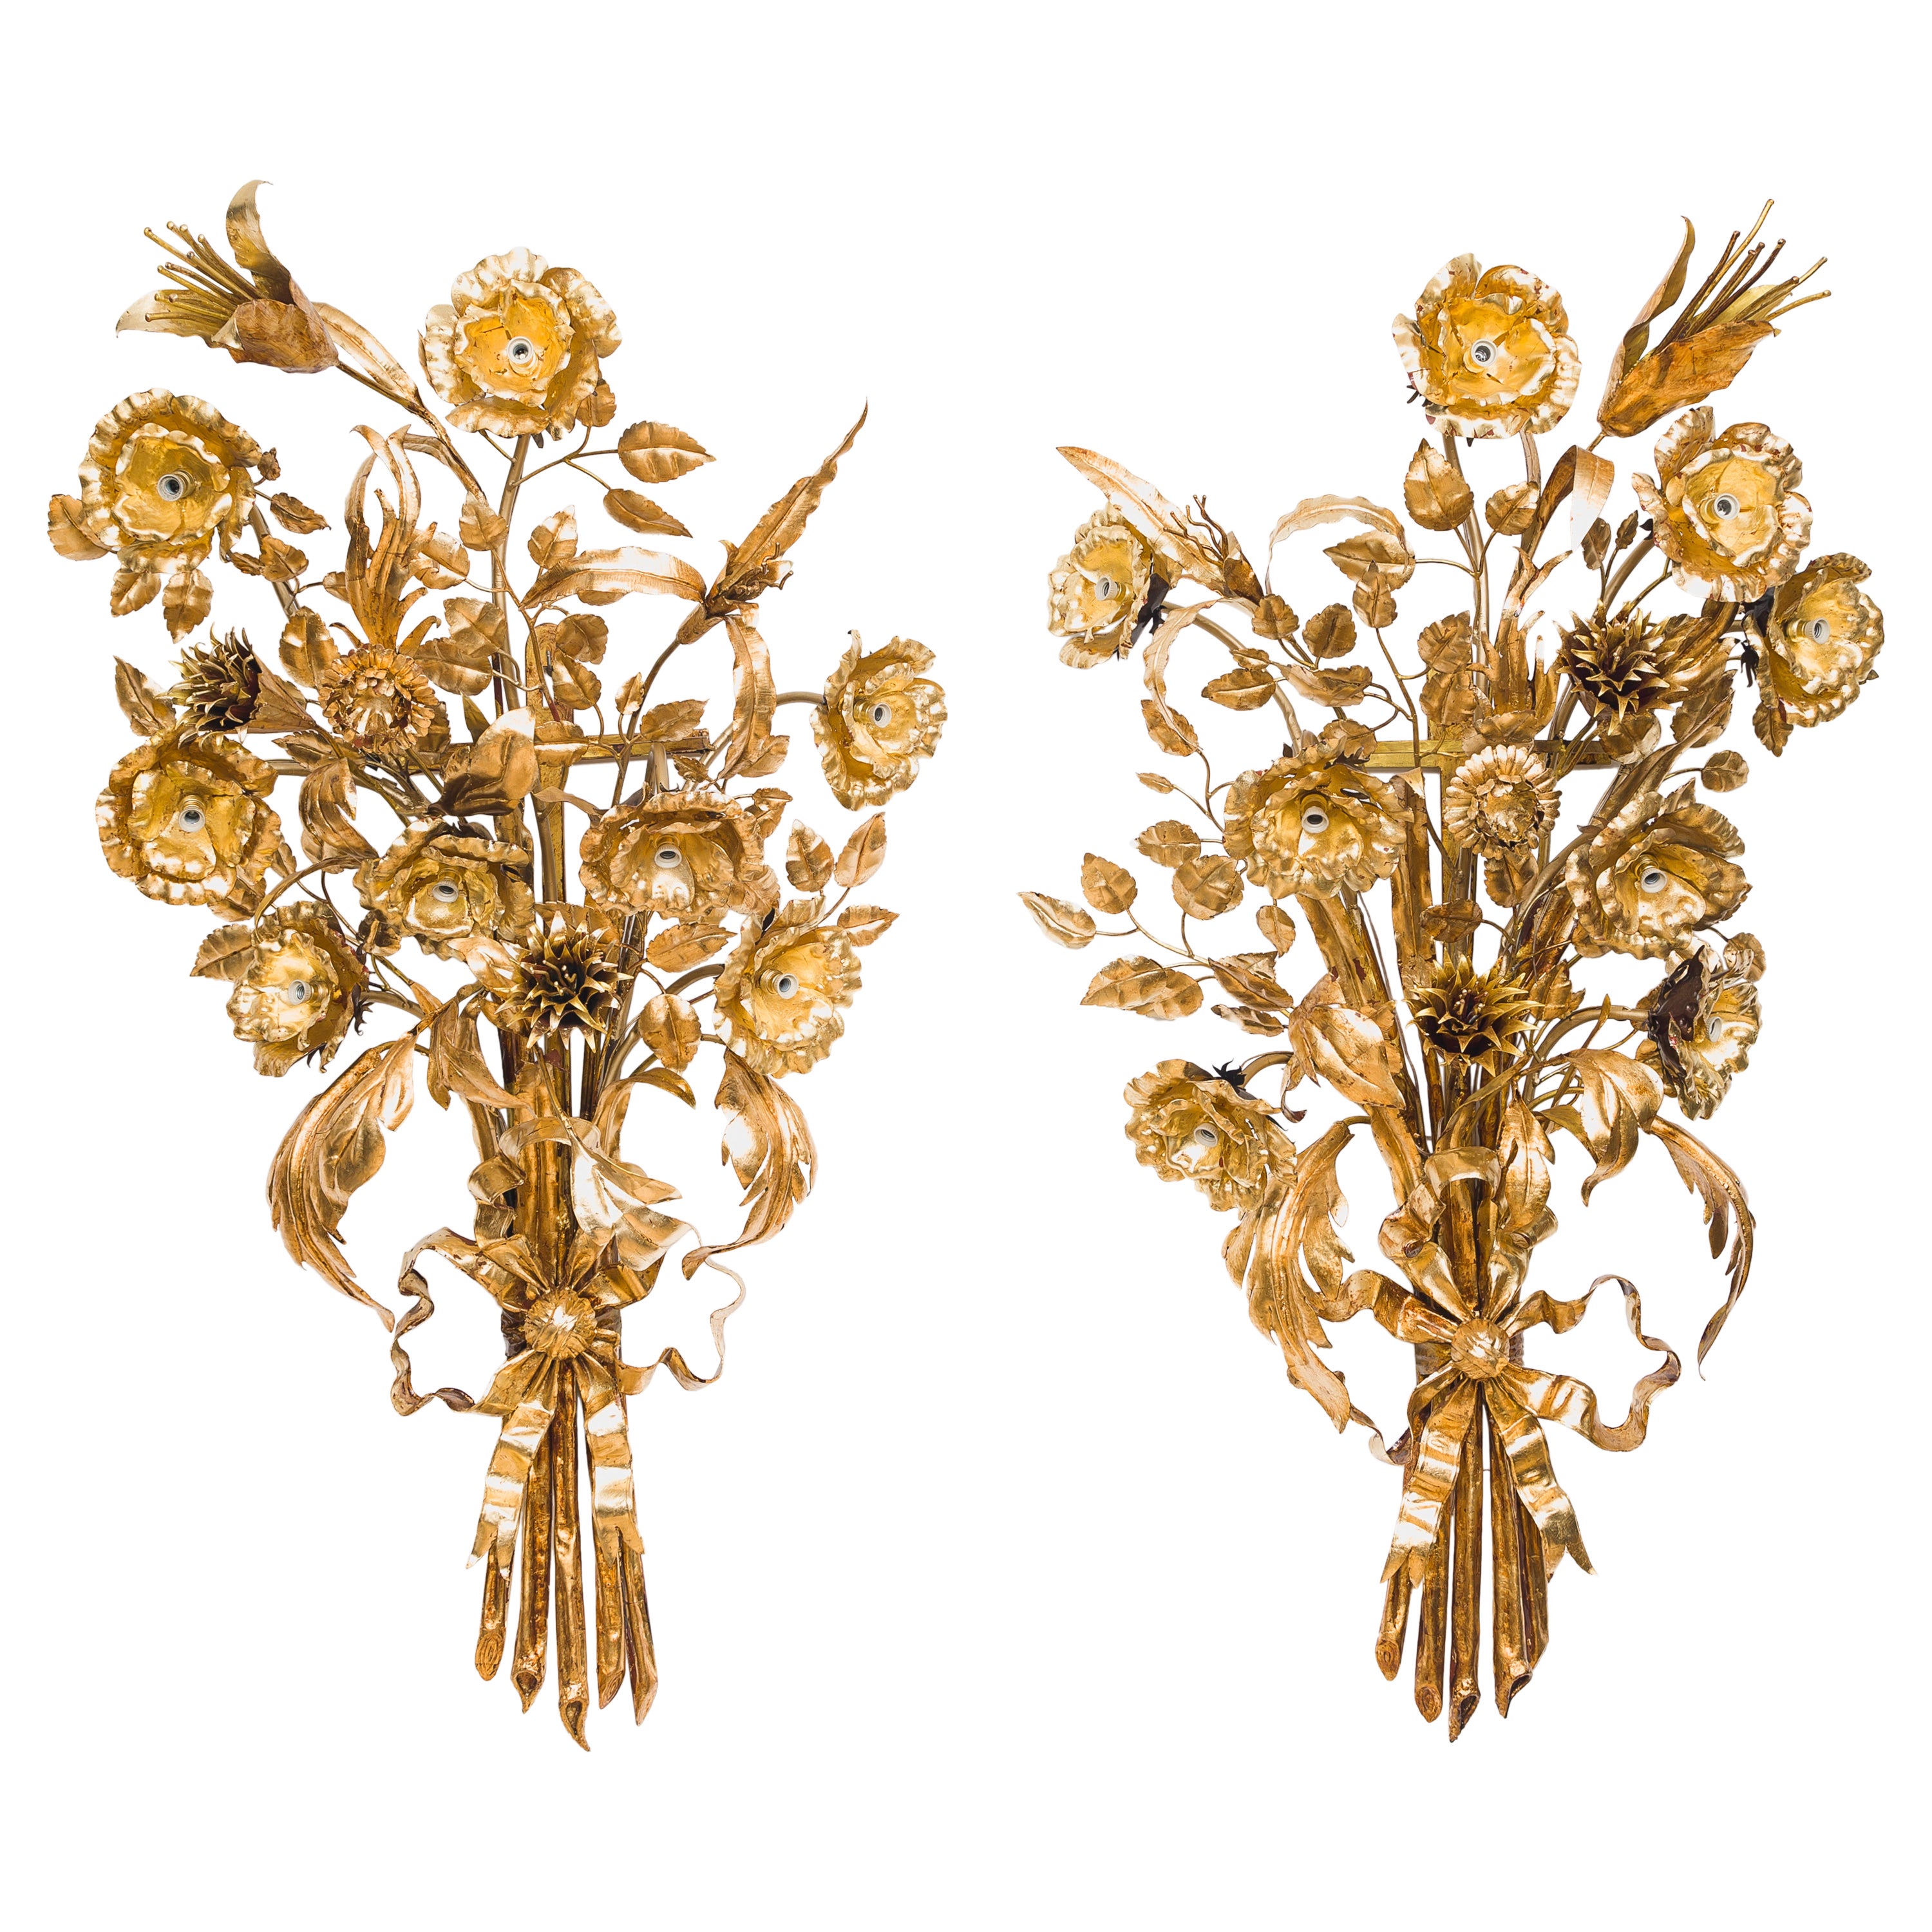 Pair of Iron and Gold Leaf Sconces, France, circa 1910